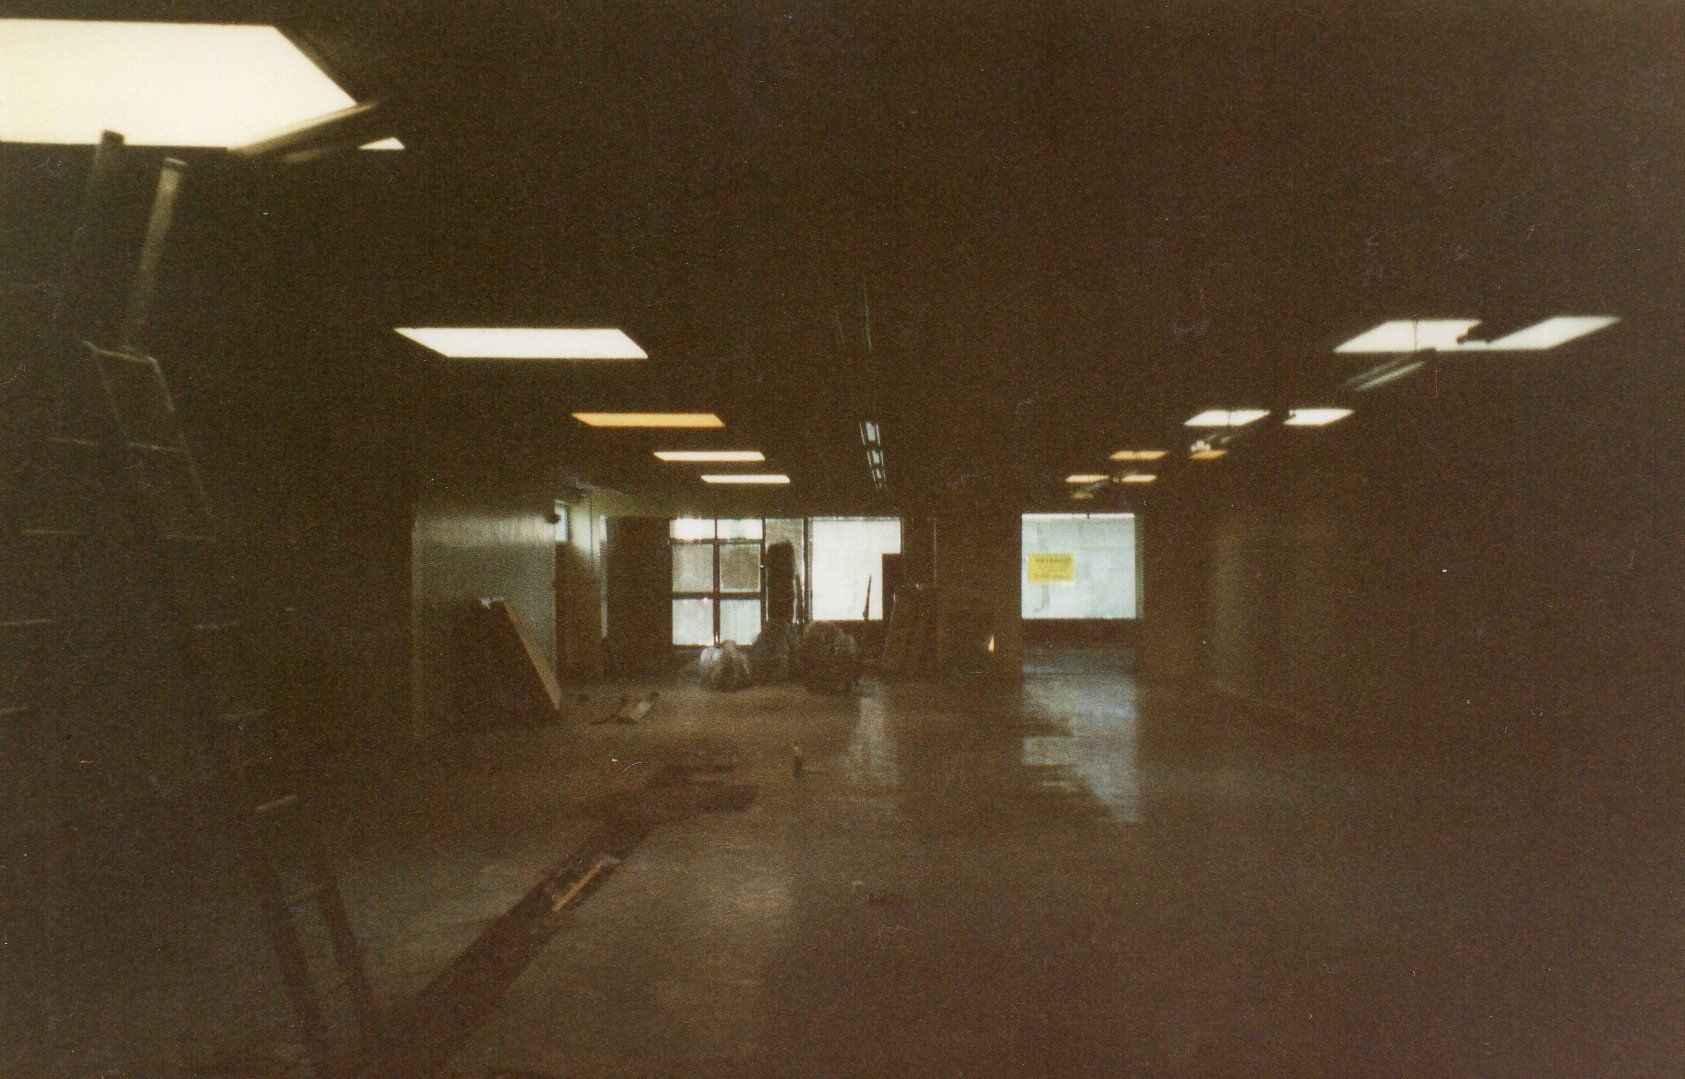 Renovation and Decoration takes place in 1990